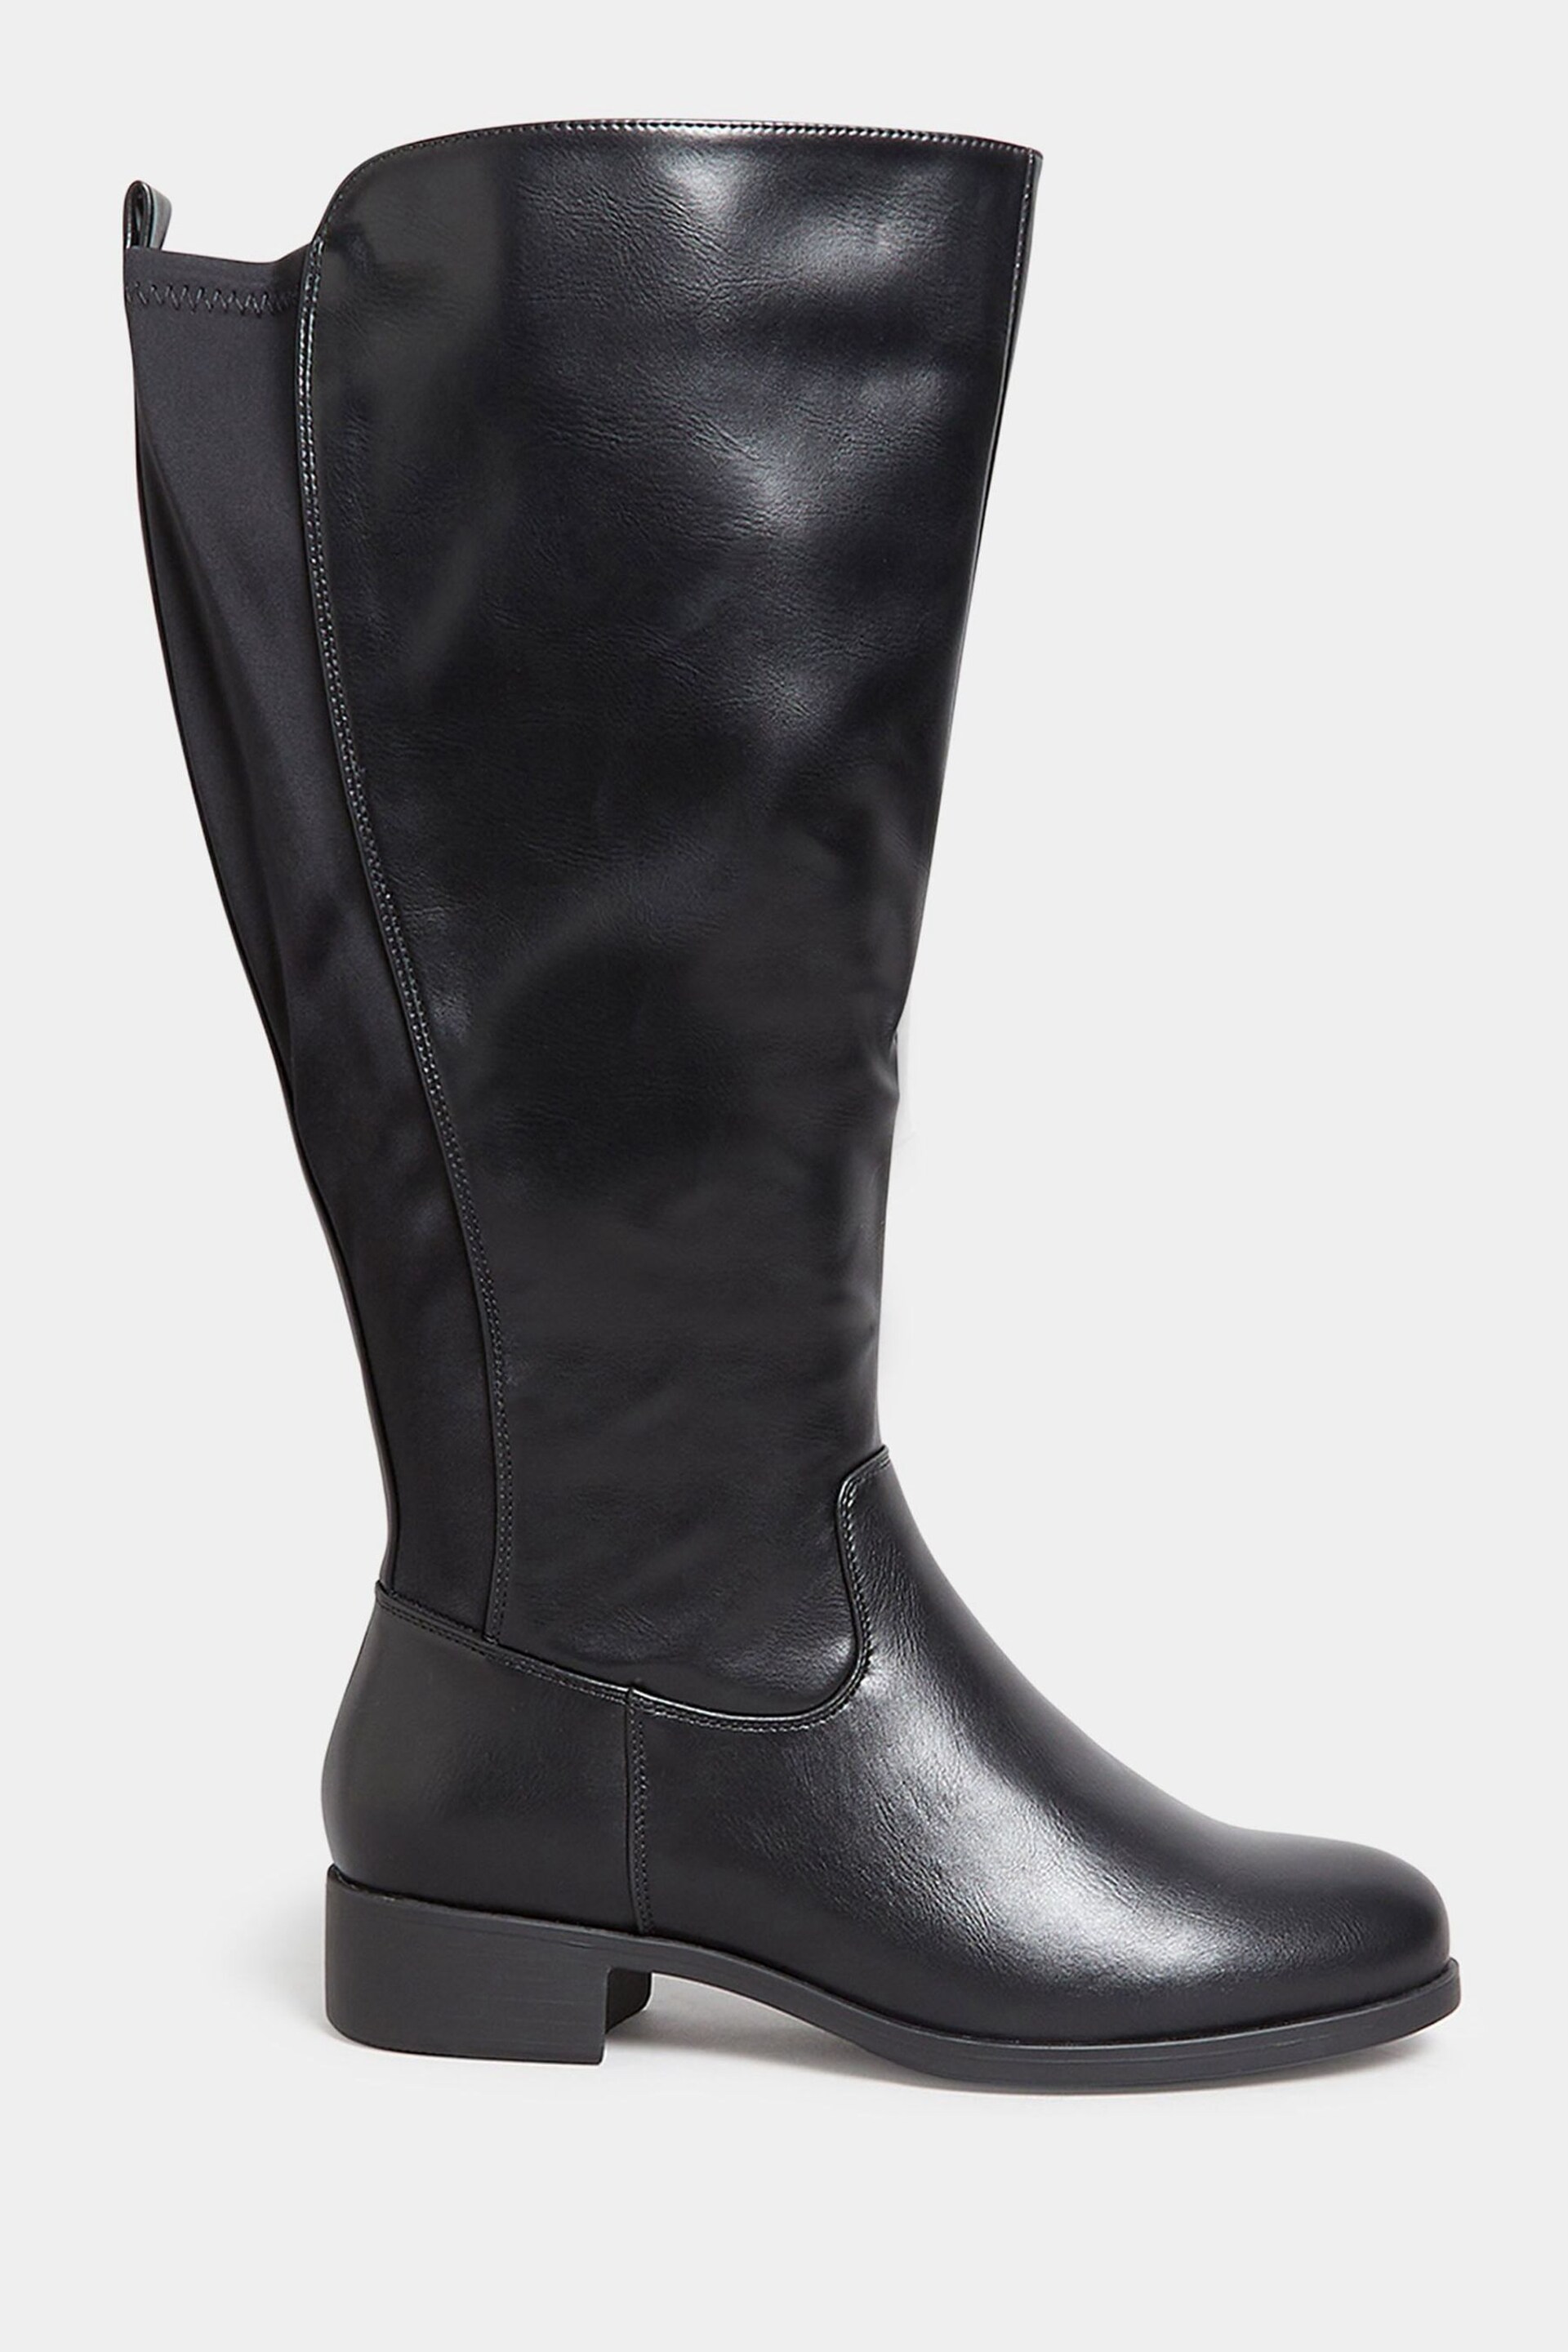 Yours Curve Black Wide Fit Wide Fit Stretch Knee PU Boot - Image 1 of 4